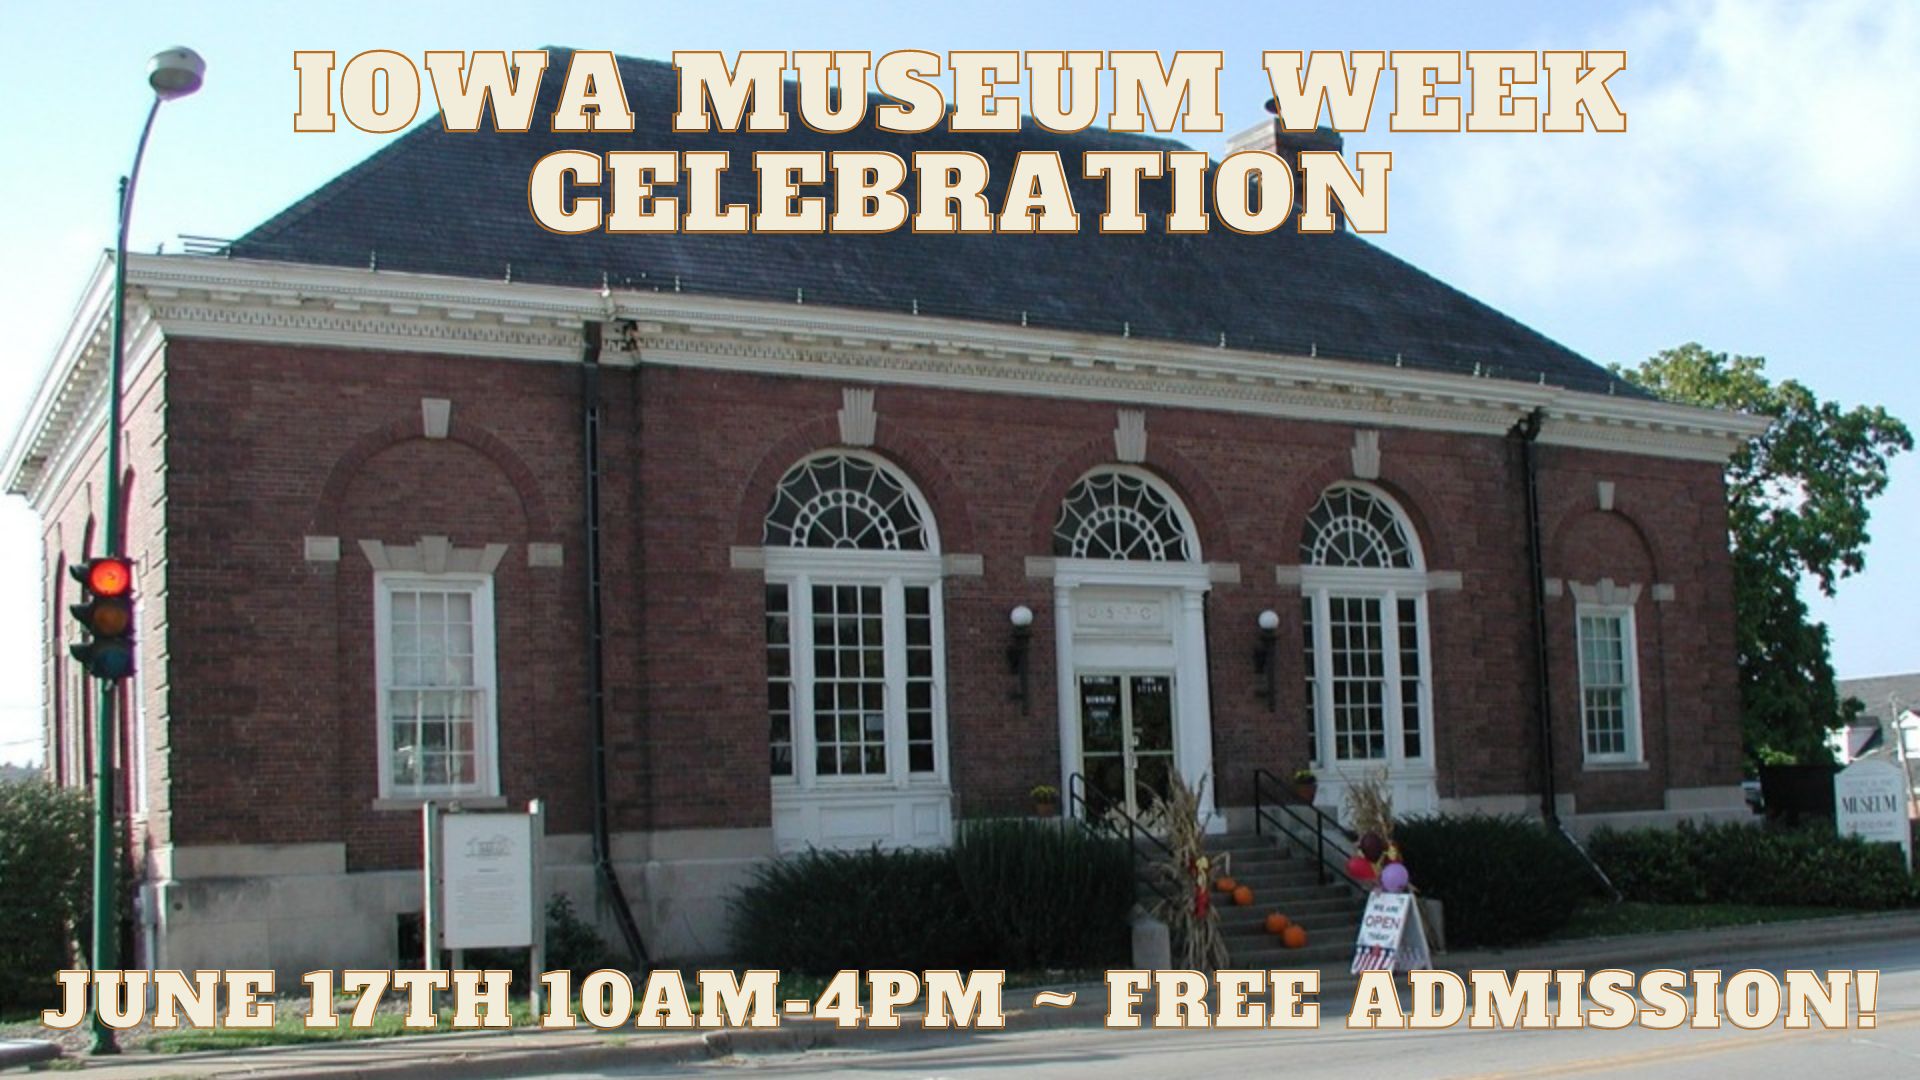 Iowa Museum Week promotion. Free admission to museum June 17th 10am-4pm